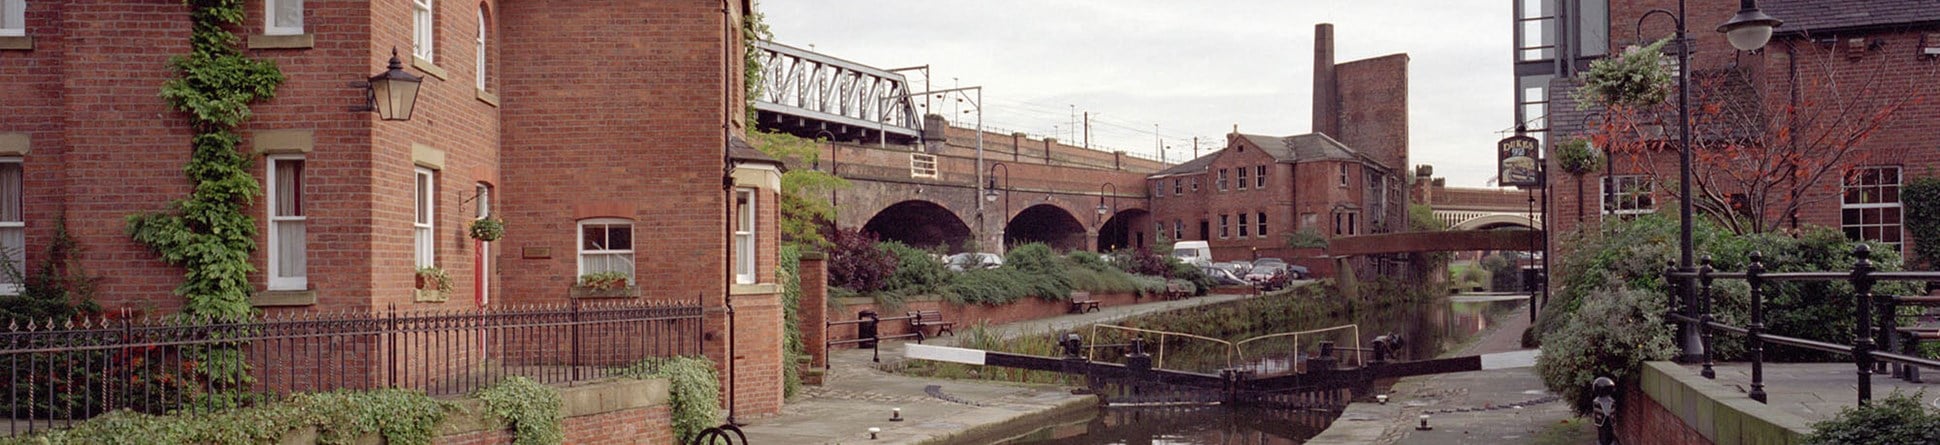 Castlefield Canal Basin, Manchester